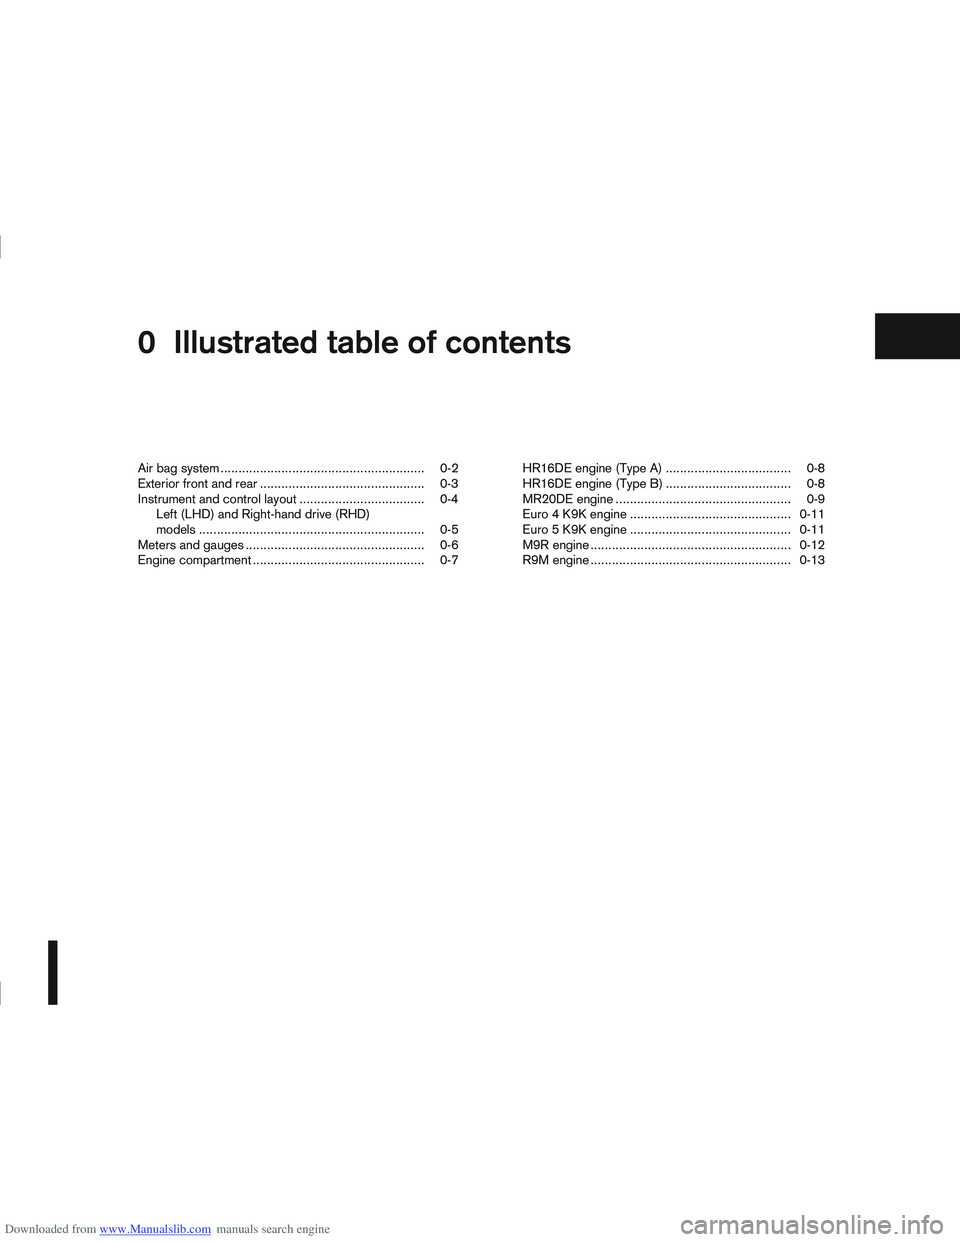 NISSAN QASHQAI 2008  Owners Manual Downloaded from www.Manualslib.com manuals search engine 0Illustrated table of contents
Illustrated table of contents
Air bag system ......................................................... 0-2
Exter